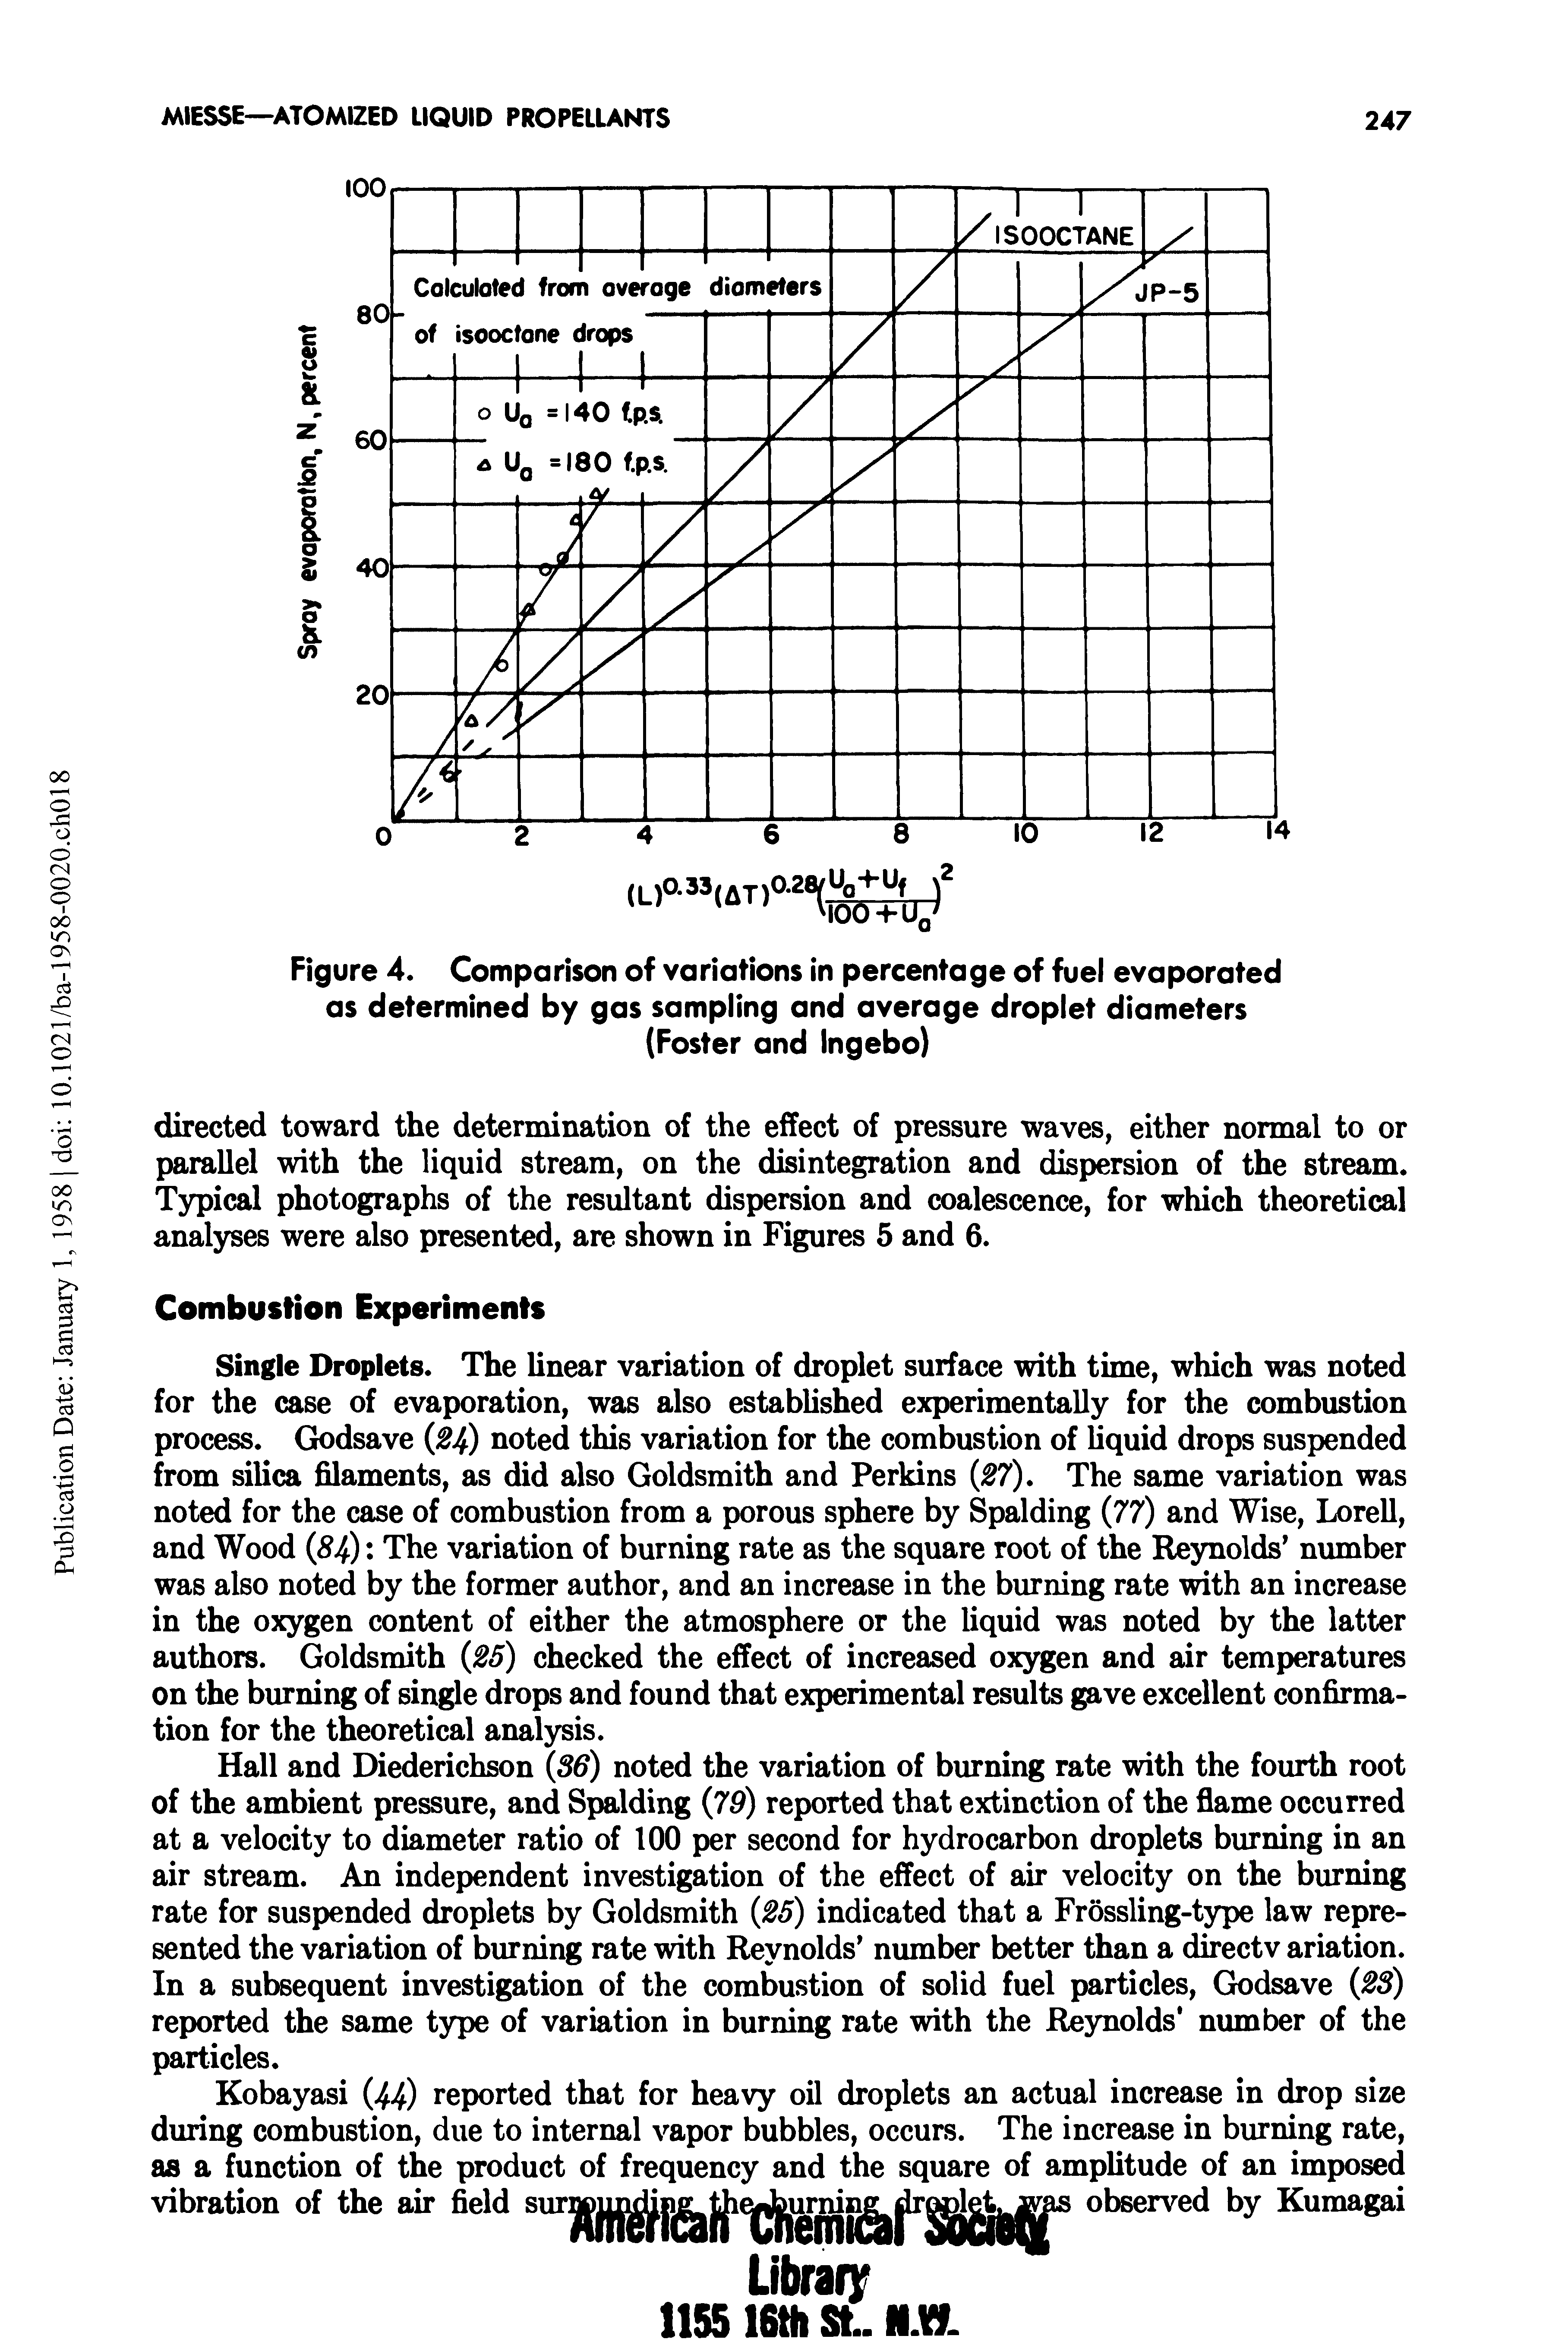 Figure 4. Comparison of variations in percentage of fuel evaporated as determined by gas sampling and average droplet diameters (Foster and Ingebo)...